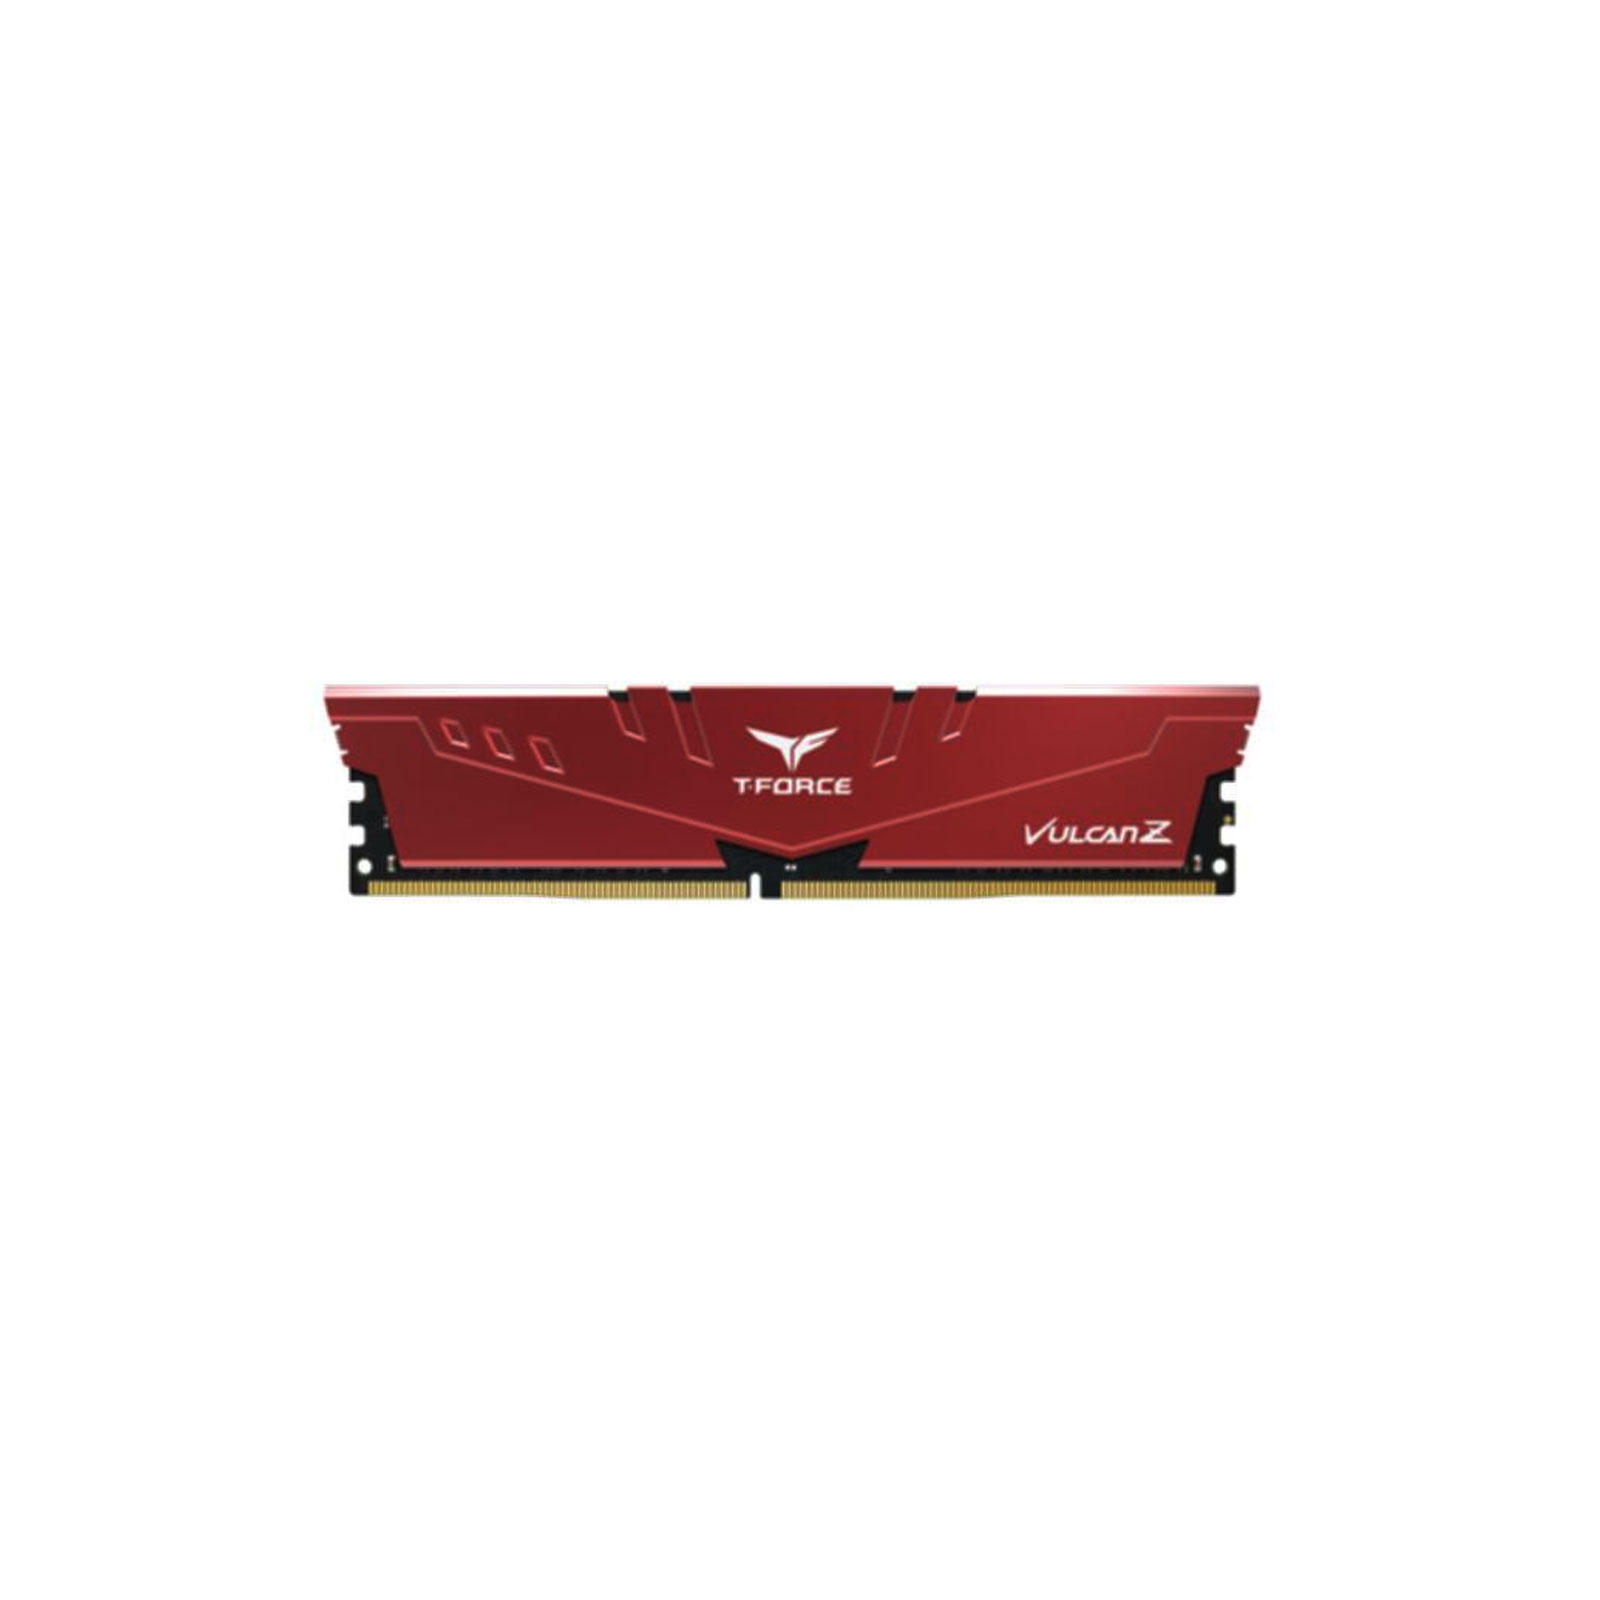 Teamgroup DDR4 16GB KIT 2x8GB PC 3200 Teamgroup T-Force Vulcan Z TLZGD416G3200HC16FDC01 gr Arbeitsspeicher